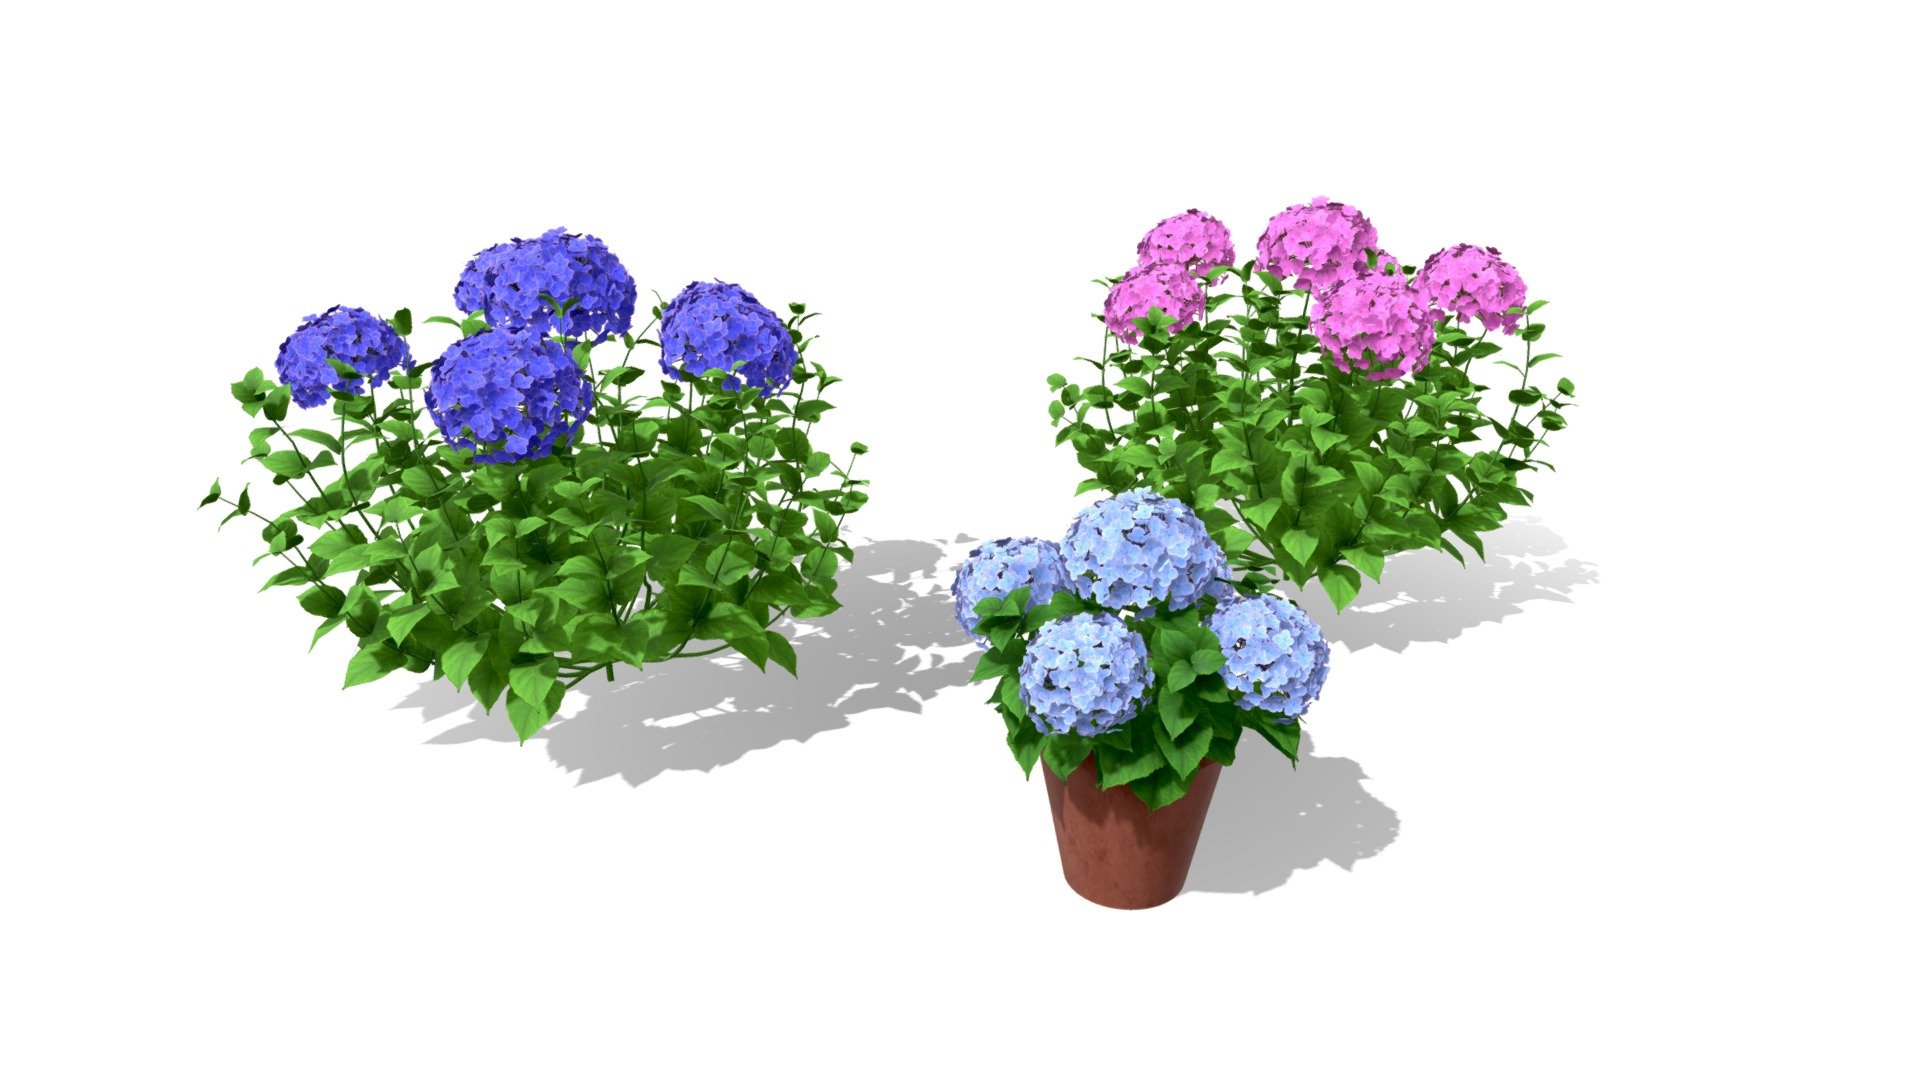 Introducing our meticulously crafted 3D model of the Big Daddy Hydrangea flower shrub, available in three stunning variations to elevate the aesthetic appeal of your digital garden or landscape projects. Each model is intricately detailed, showcasing the lush green foliage and vibrant blossoms that make this plant a favorite among garden enthusiasts.
1- light blue flowers with pot
2- deep blue flowers 
3- deep pink flowers

low poly Optimized for efficient rendering without compromising quality.
Highly detailed and realistic model
Includes textures, PBR materials..
Perfect for use in architectural visualizations, animations, game and other 3D projects

Check out the Tutorial on how to create the flowering shrub using SpeedTree:
https://youtu.be/1MkhtEn883U

*Statistics : 
Flower Bush poly: 55500
Flower pot poly: 42416
Total poly: 153416 Verts: 133180

*Dimensions: real world scale can be scaled.
Pot Height:  90 cm  Bush height: 140 cm
Pot width: 80 cm  Bush width: 180 cm

*UV for easy texture application 3d model